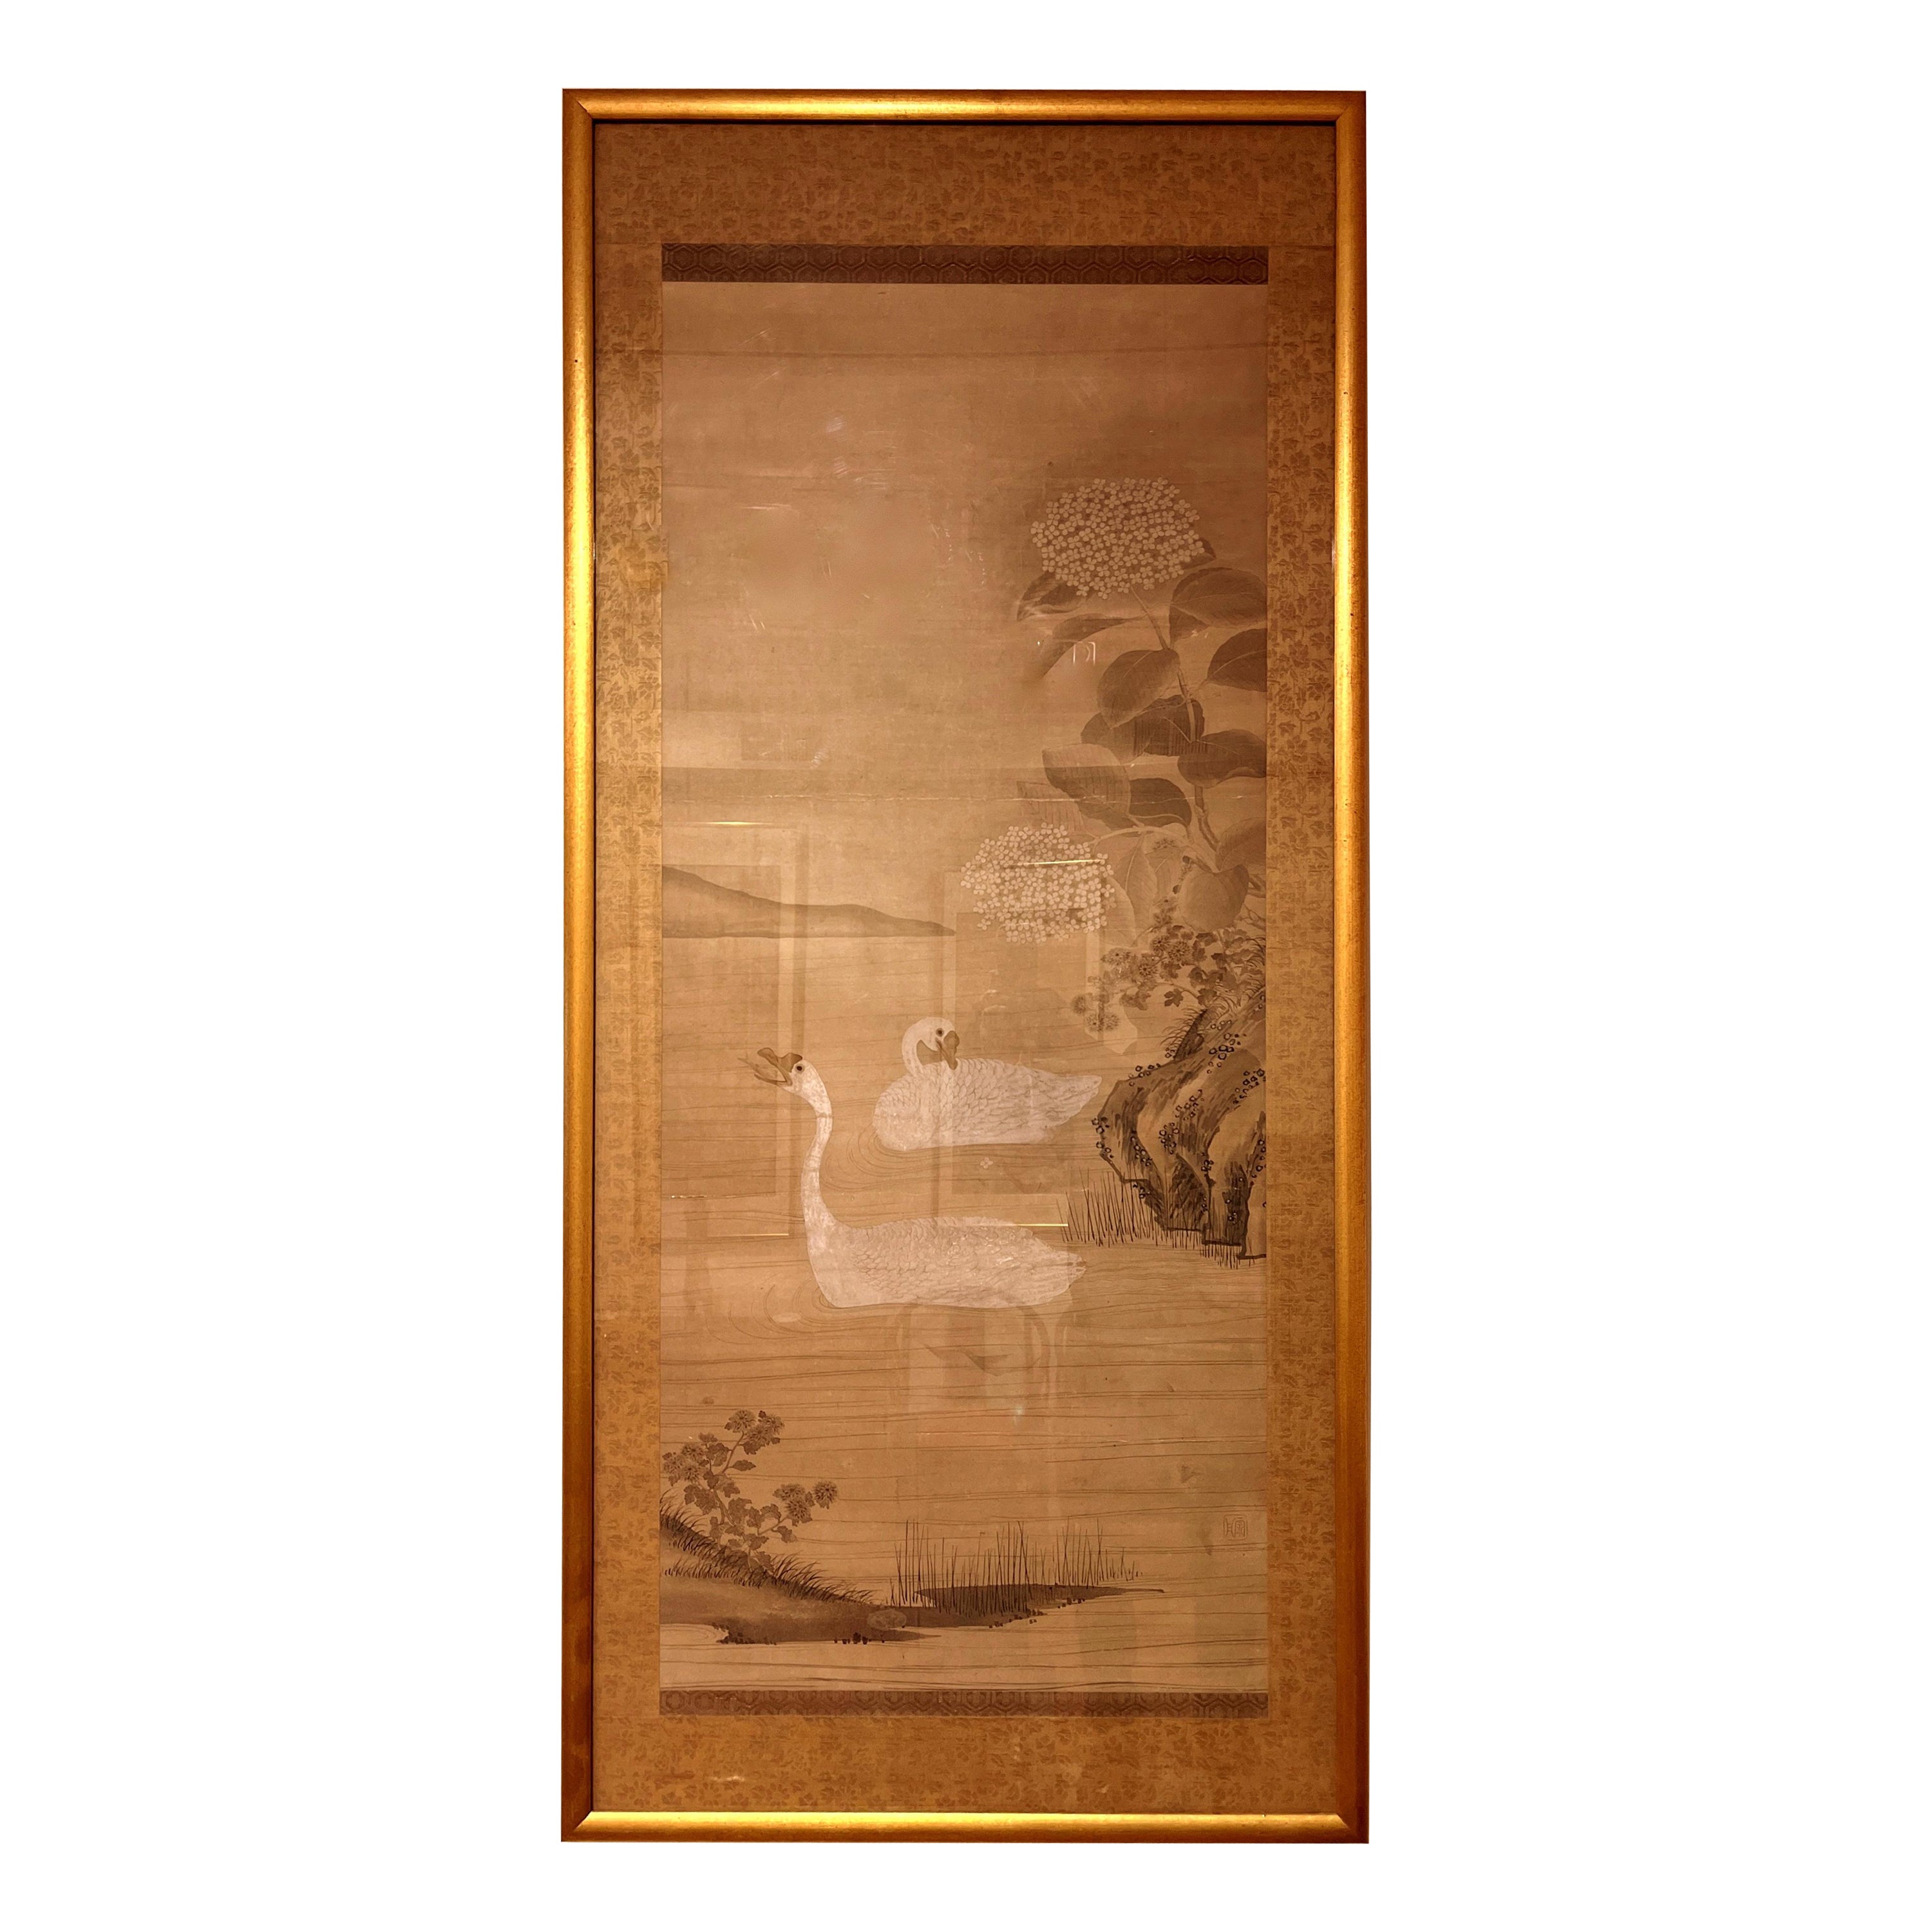 Framed Japanese Brush Painting of Two White Geese Swimming in a Pond